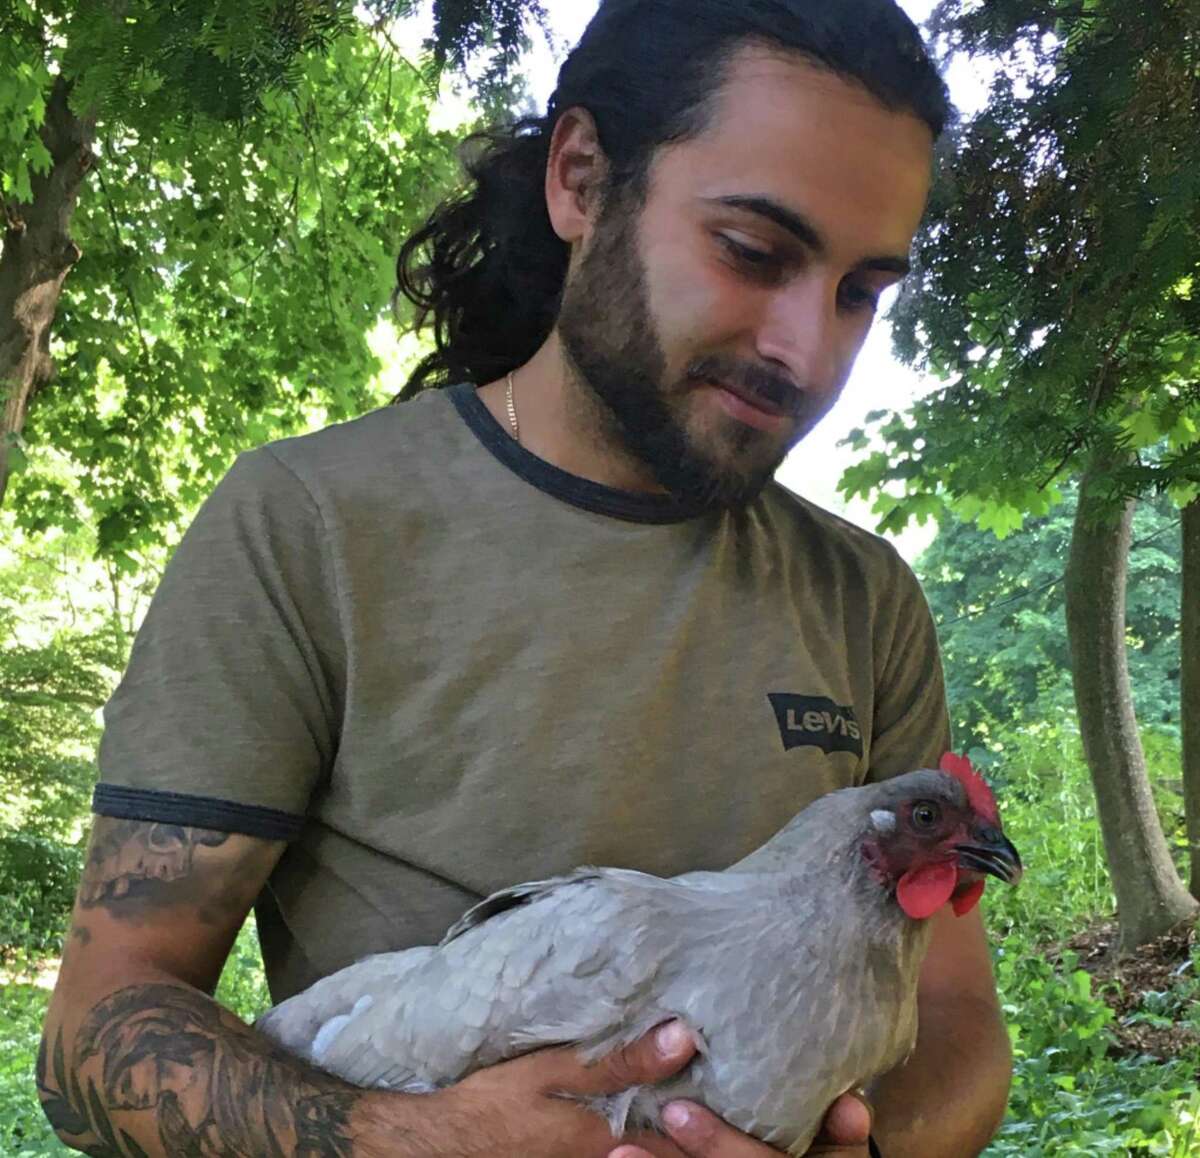 Nikos Papadopoulos holds one of his chickens at his new home, Fairview Farm.